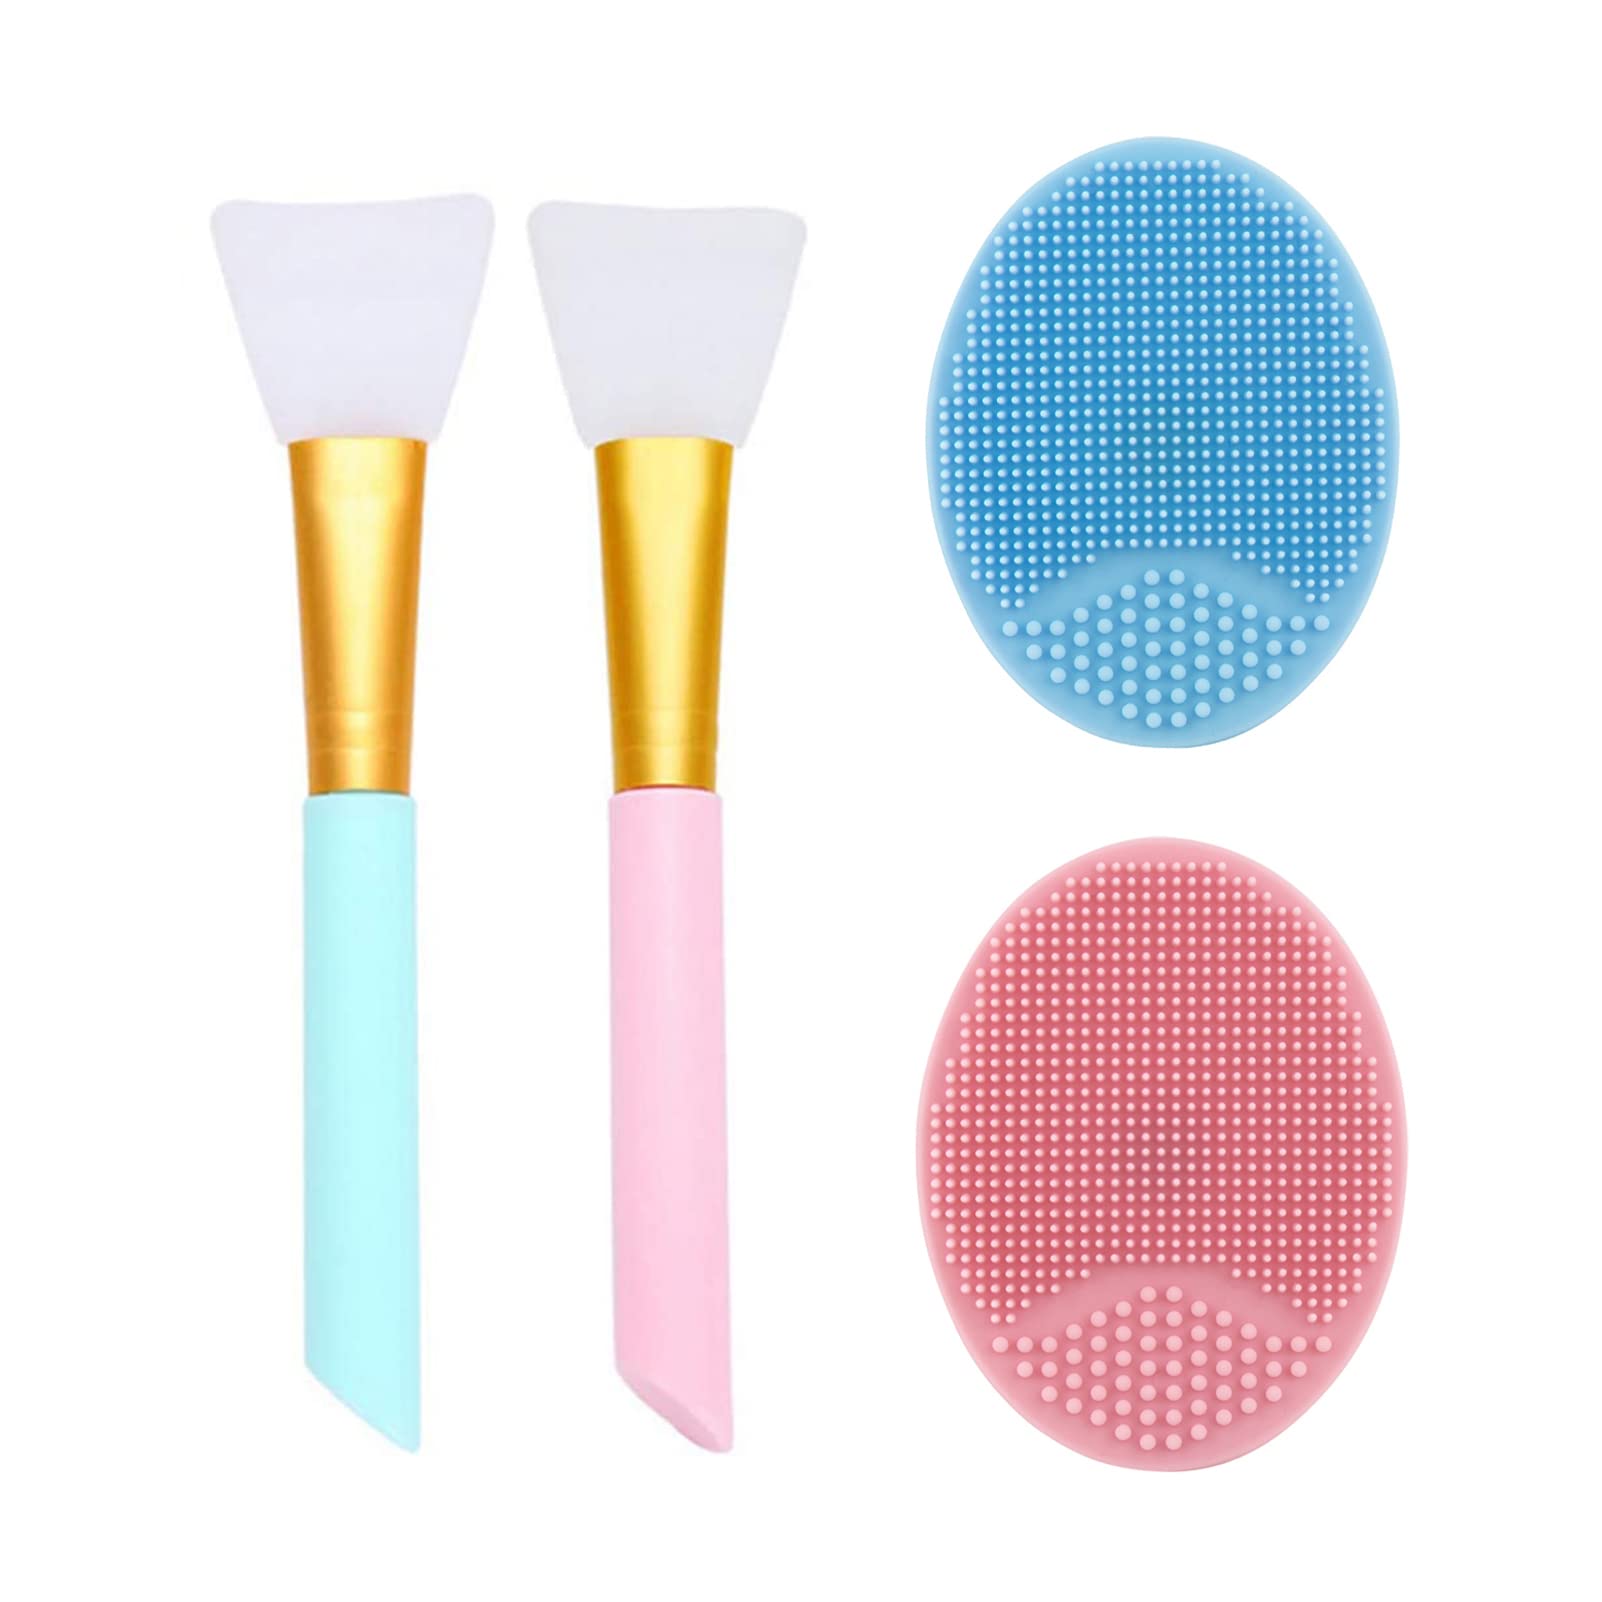 2 Pcs Facial Cleansing Brush,2 Pcs Silicone Face Mask Brush Mini Manual Silicone Face Scrubber Face Massager Brush Anti-Aging Skin Cleanser and Deep Exfoliator Makeup Tool for Facial Skin Care(4 Pcs)